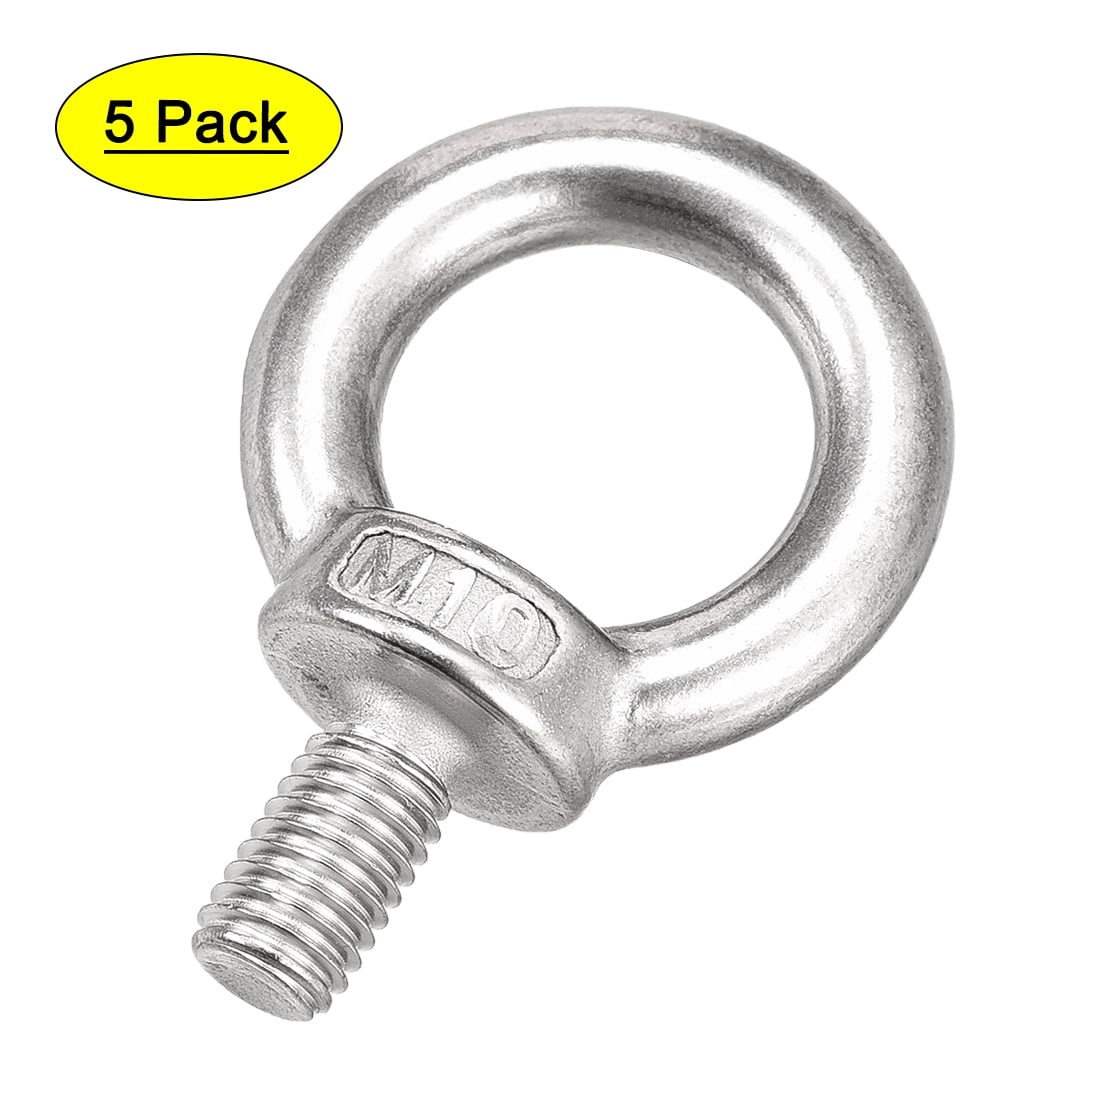 M3 M4 M5 M6 M8 M10 Lifting Eye Nuts And Eye Bolts Stainless Steel Ring Eyebolt Ring Nut Nuts-M10-1pcs